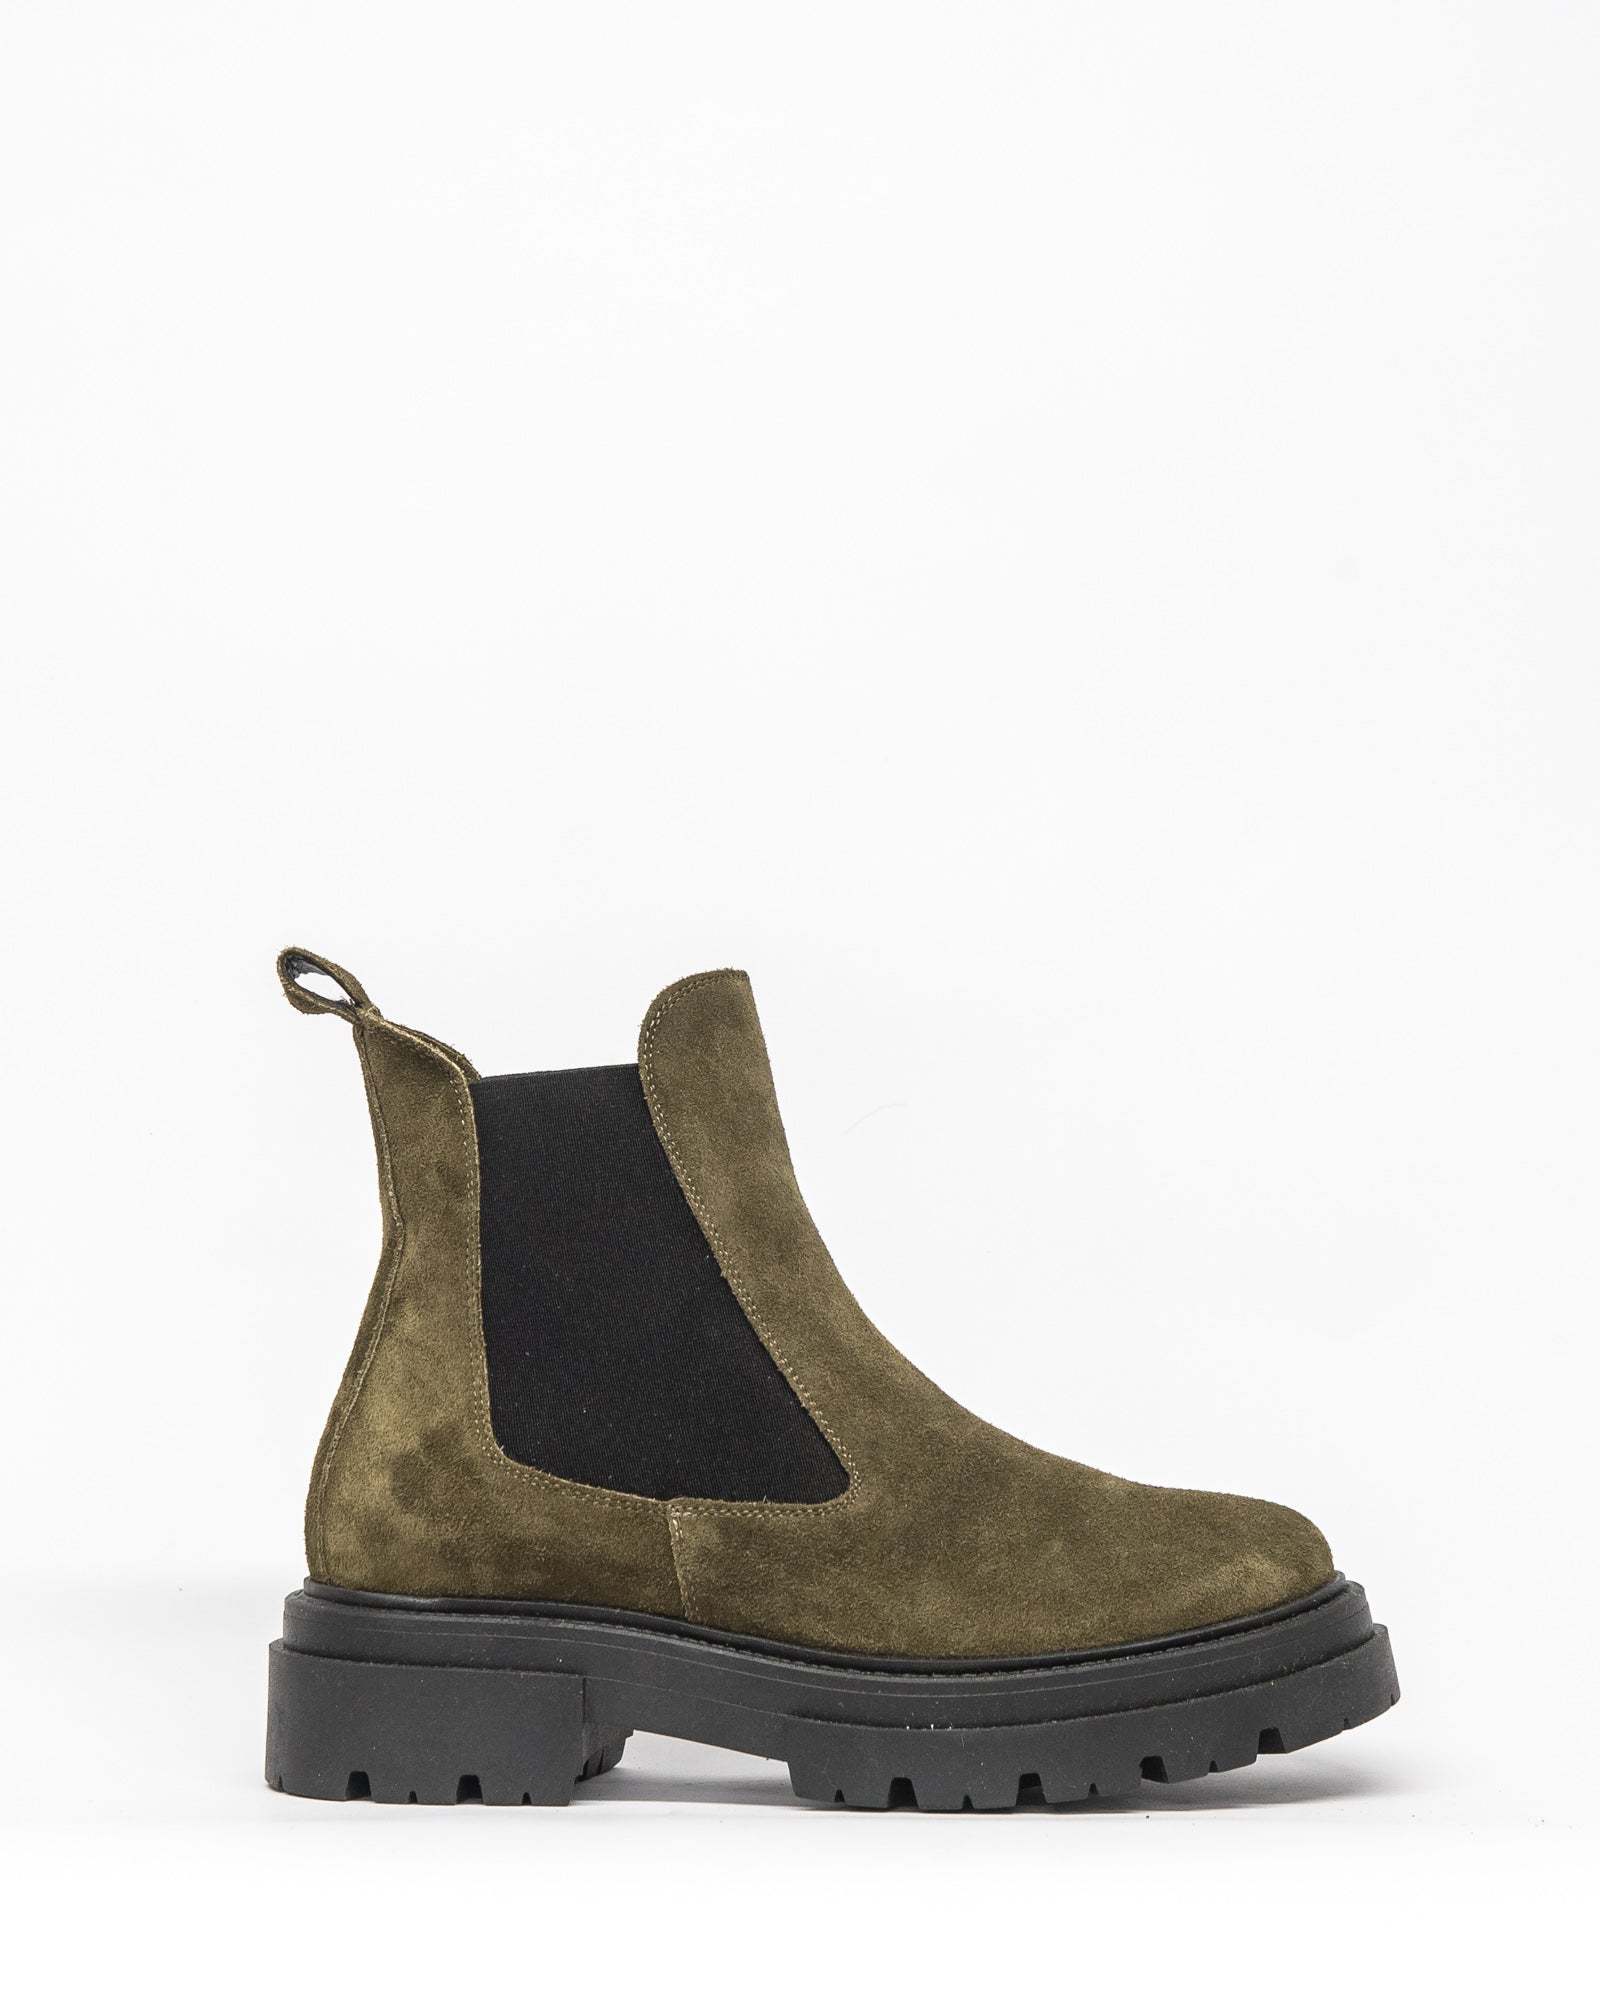 compass boot - green suede